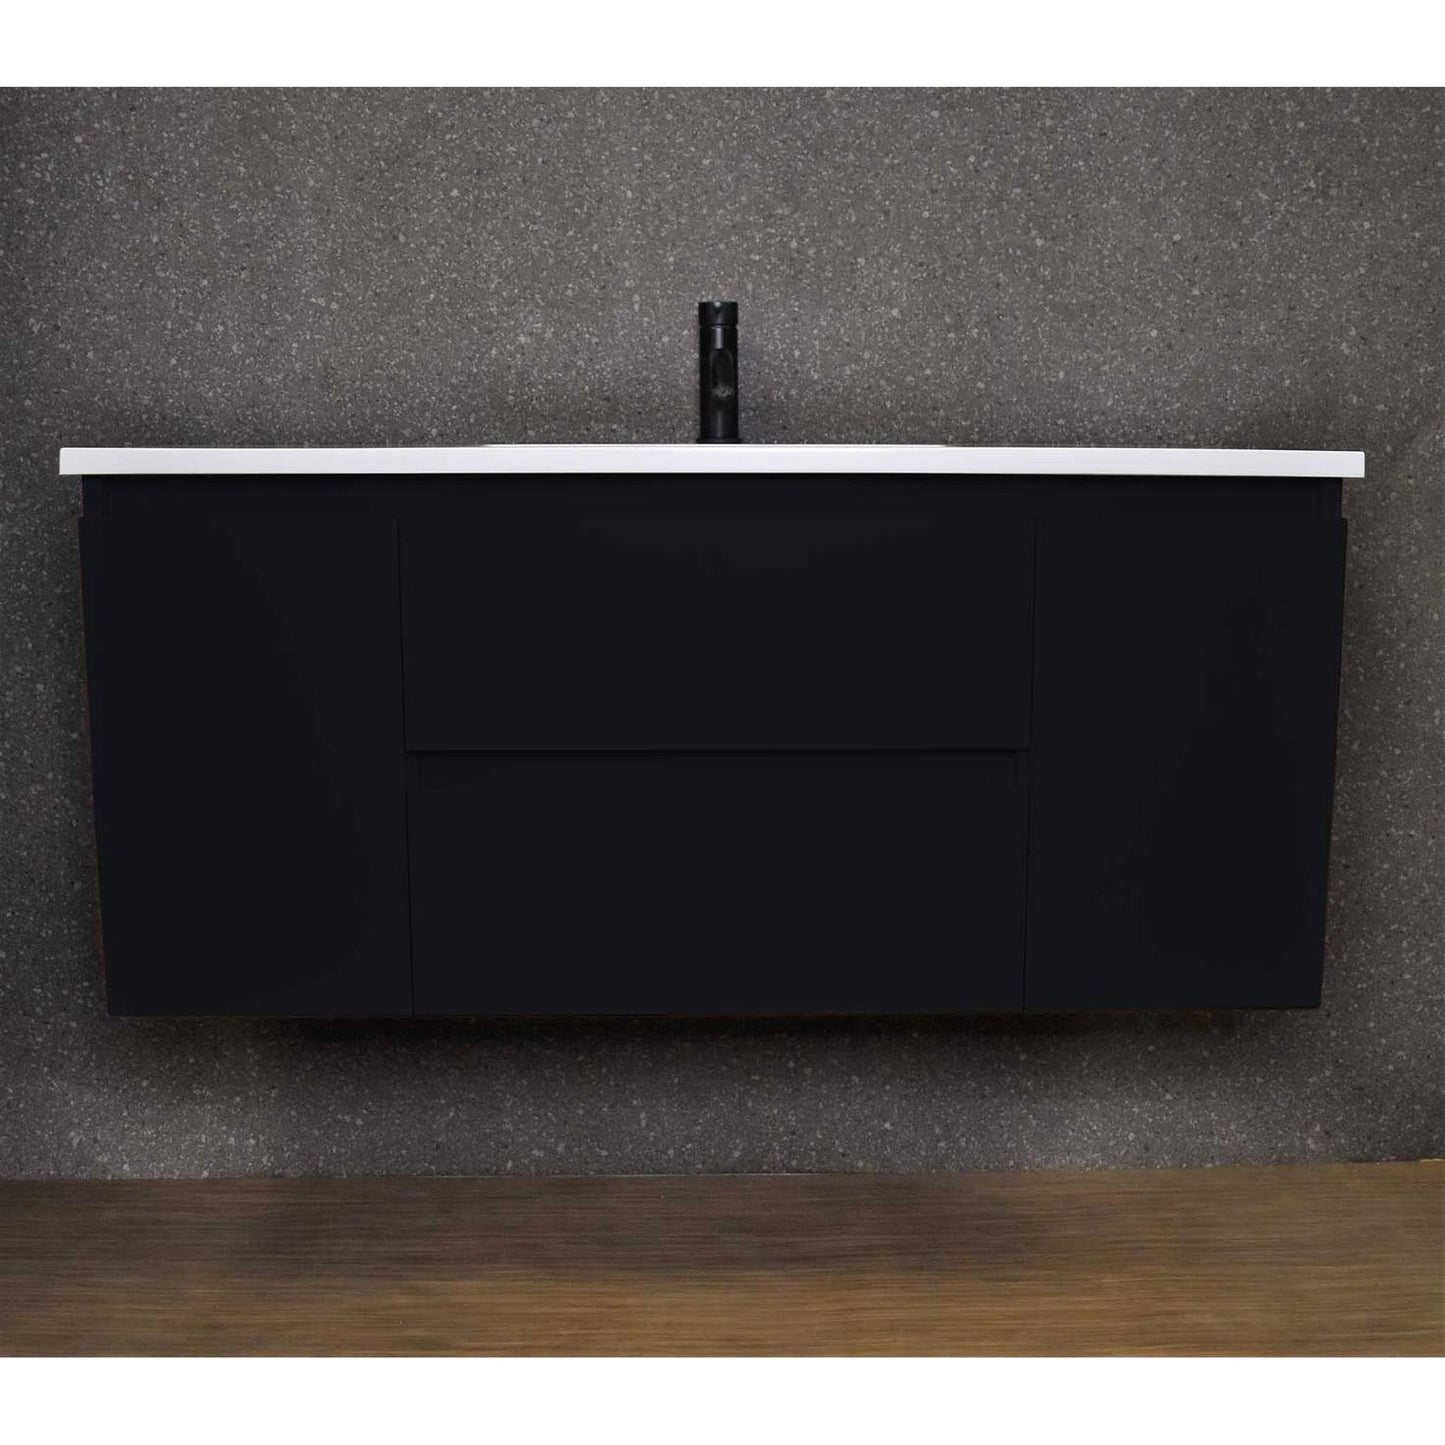 Volpa USA Salt 48" x 20" Black Wall-Mounted Floating Bathroom Vanity With Drawers, Acrylic Top and Integrated Acrylic Sink